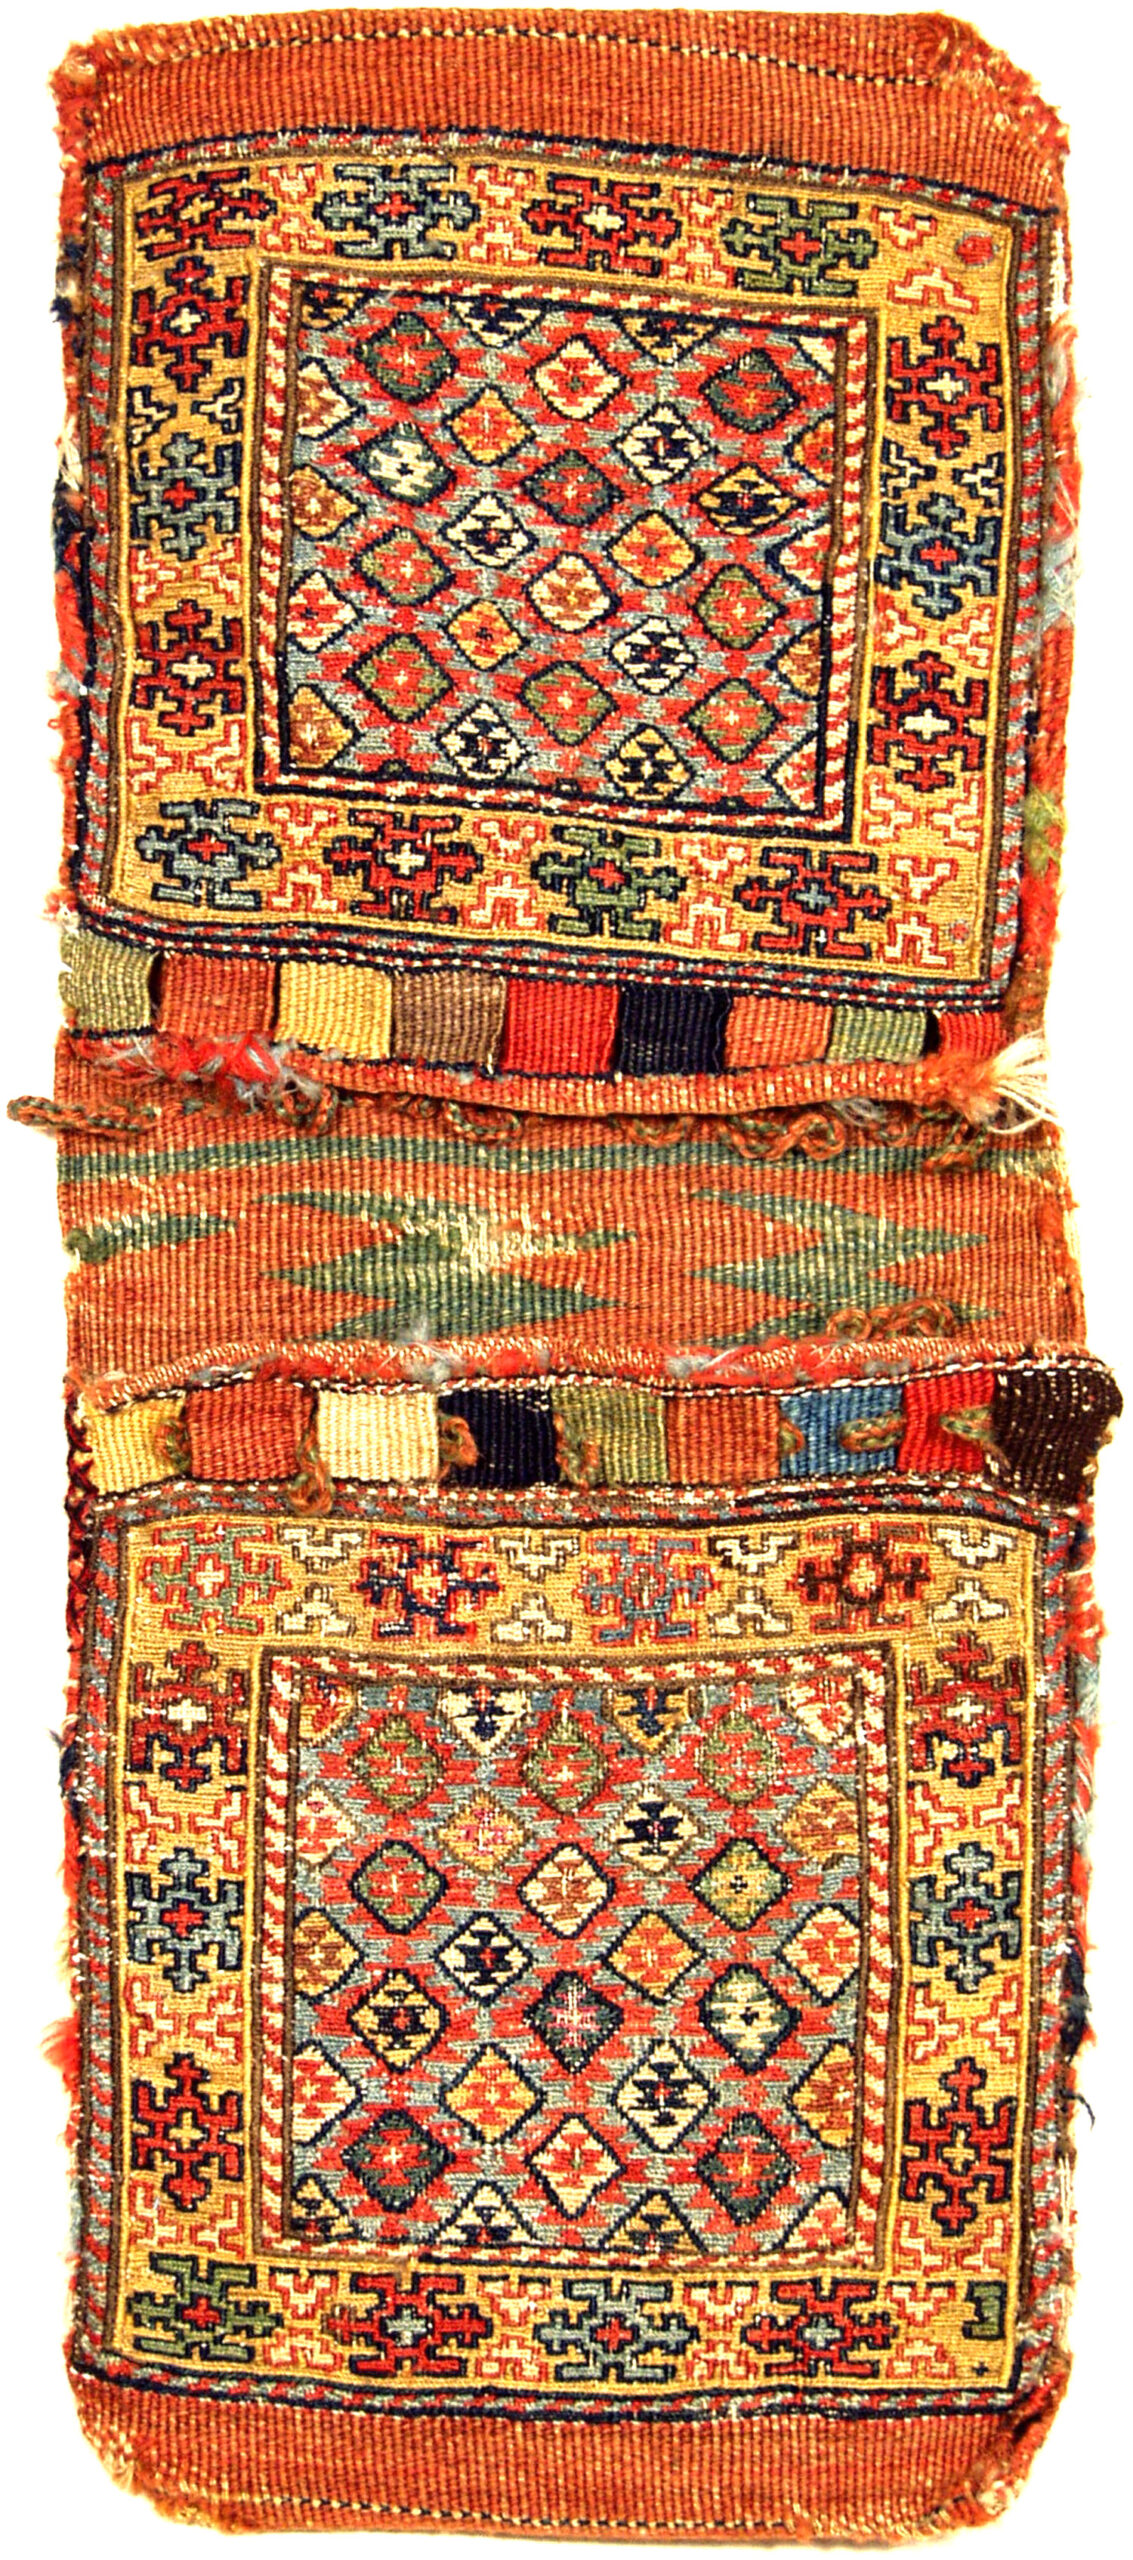 Pair of antique Shah Savan soumak bags, probably woven in the Bidjar area in northwest Persia, Douglas Stock Gallery, antique rugs Boston,MA area, antique rugs New England